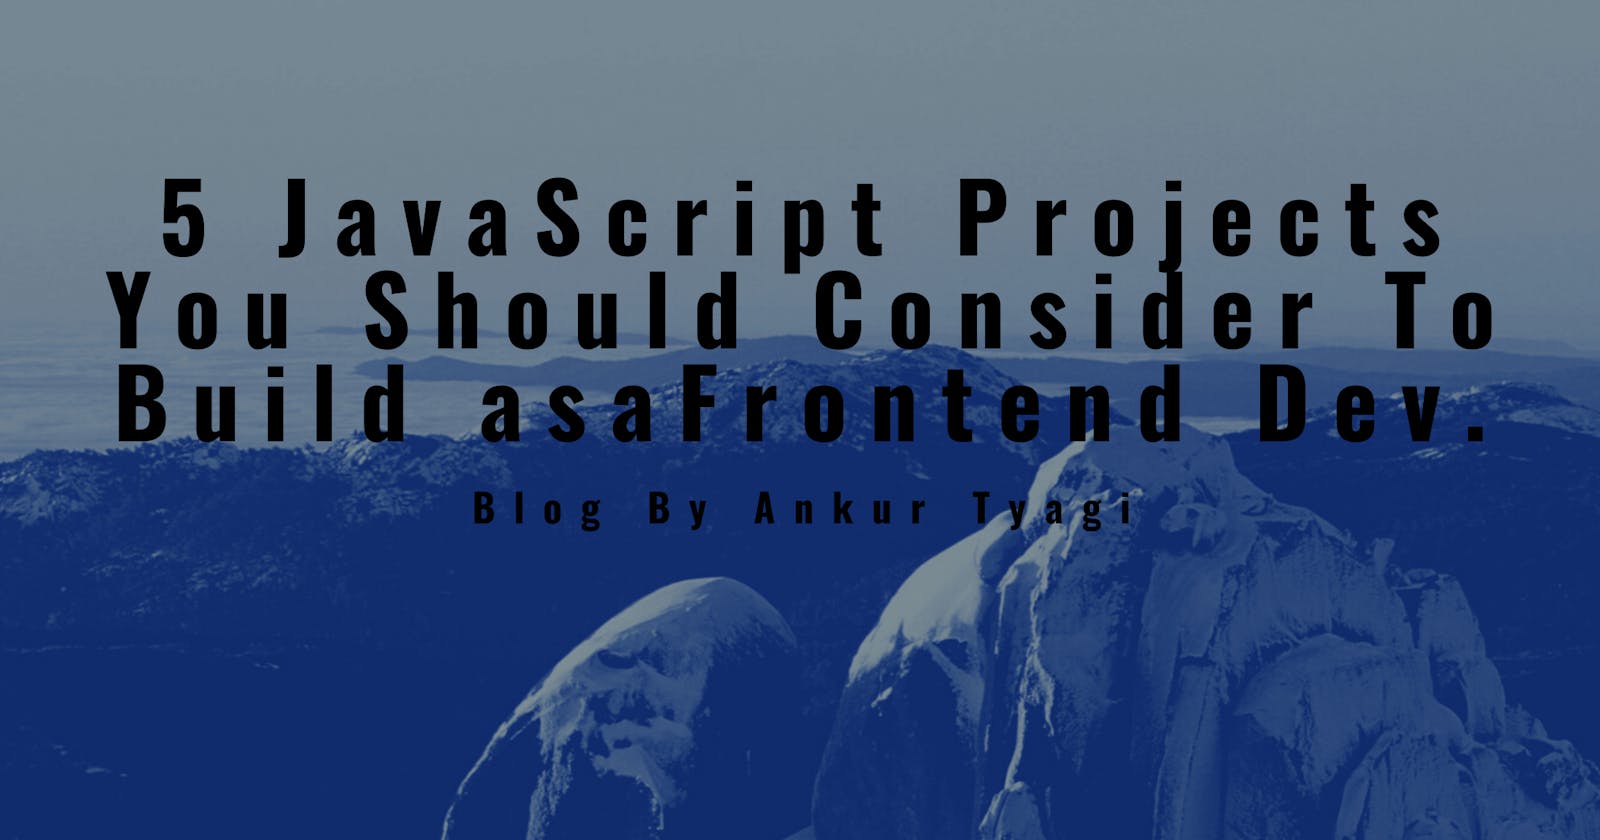 5 JavaScript Projects You Should Consider To Build As A Frontend Dev.